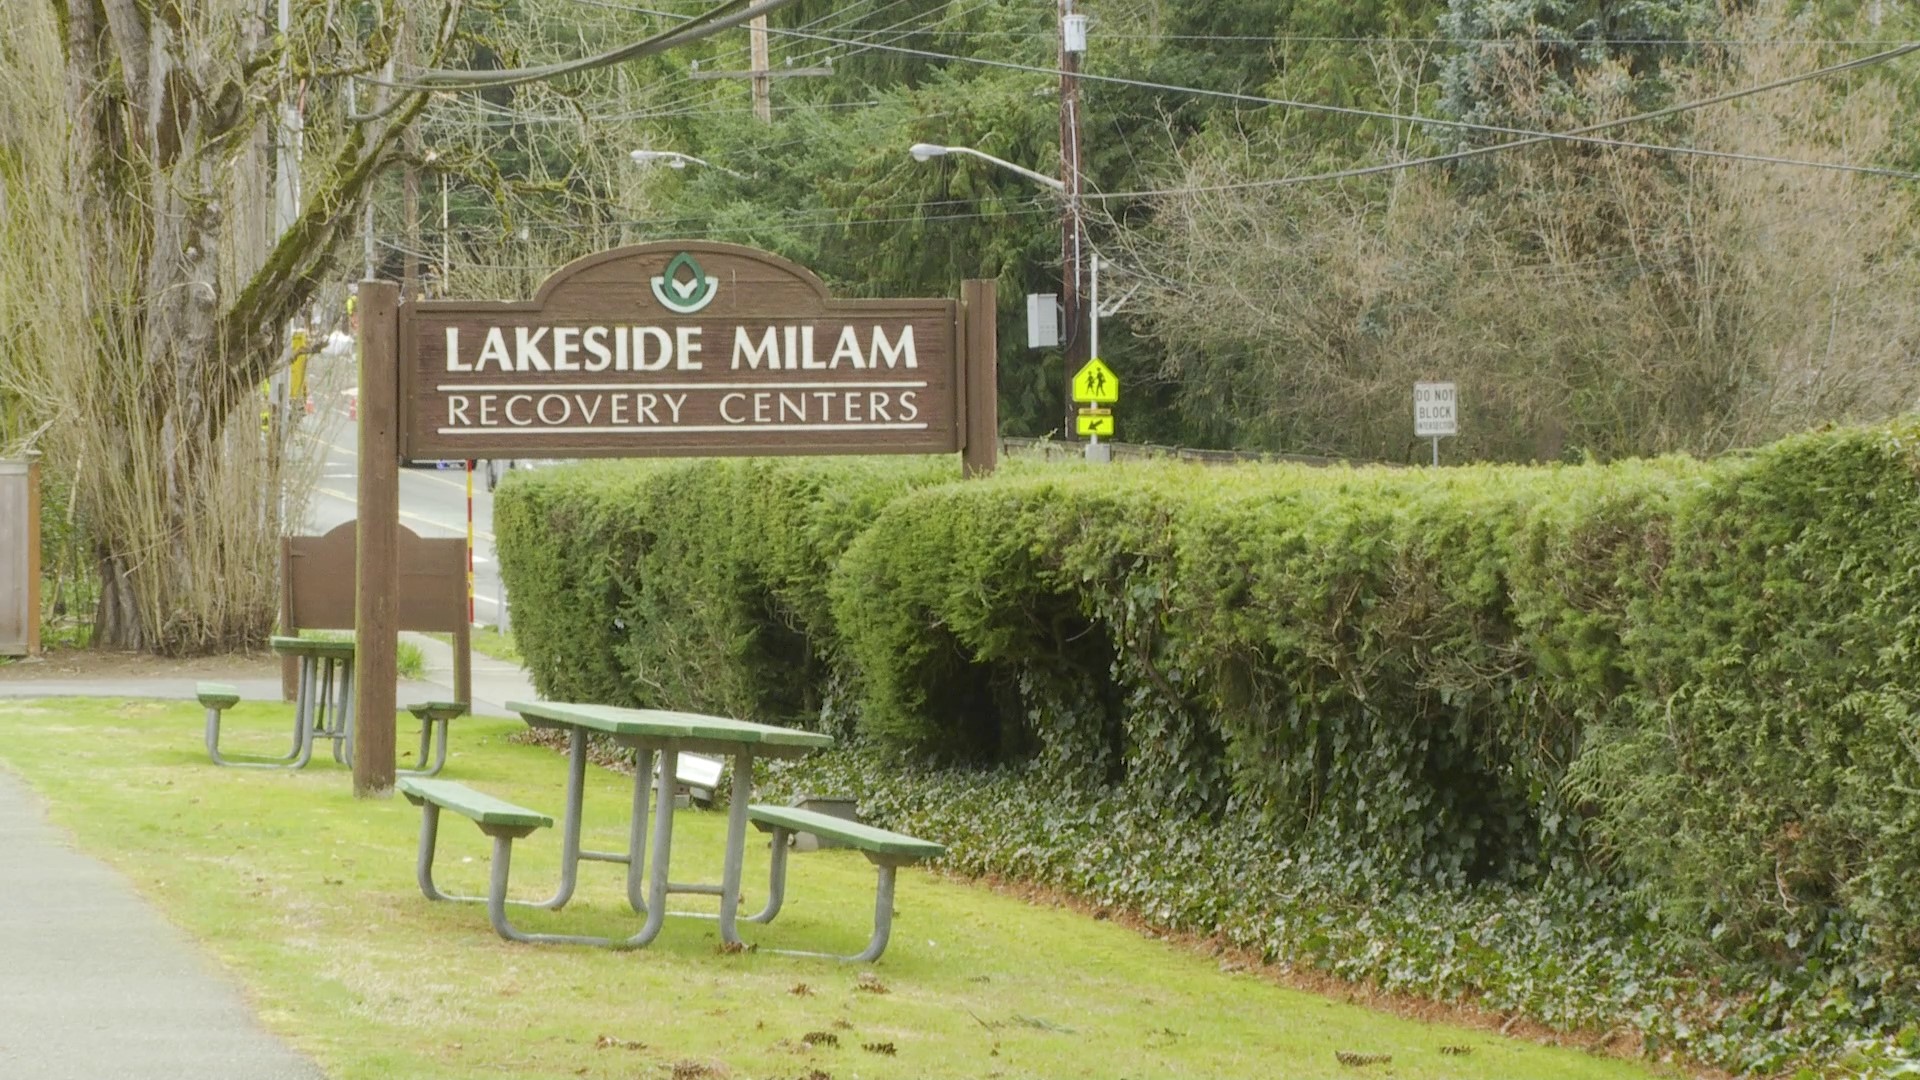 Lakeside Milam Recovery Centers offer a place to heal and a chance to hope again. Sponsored by Lakeside Milam Recovery Centers.